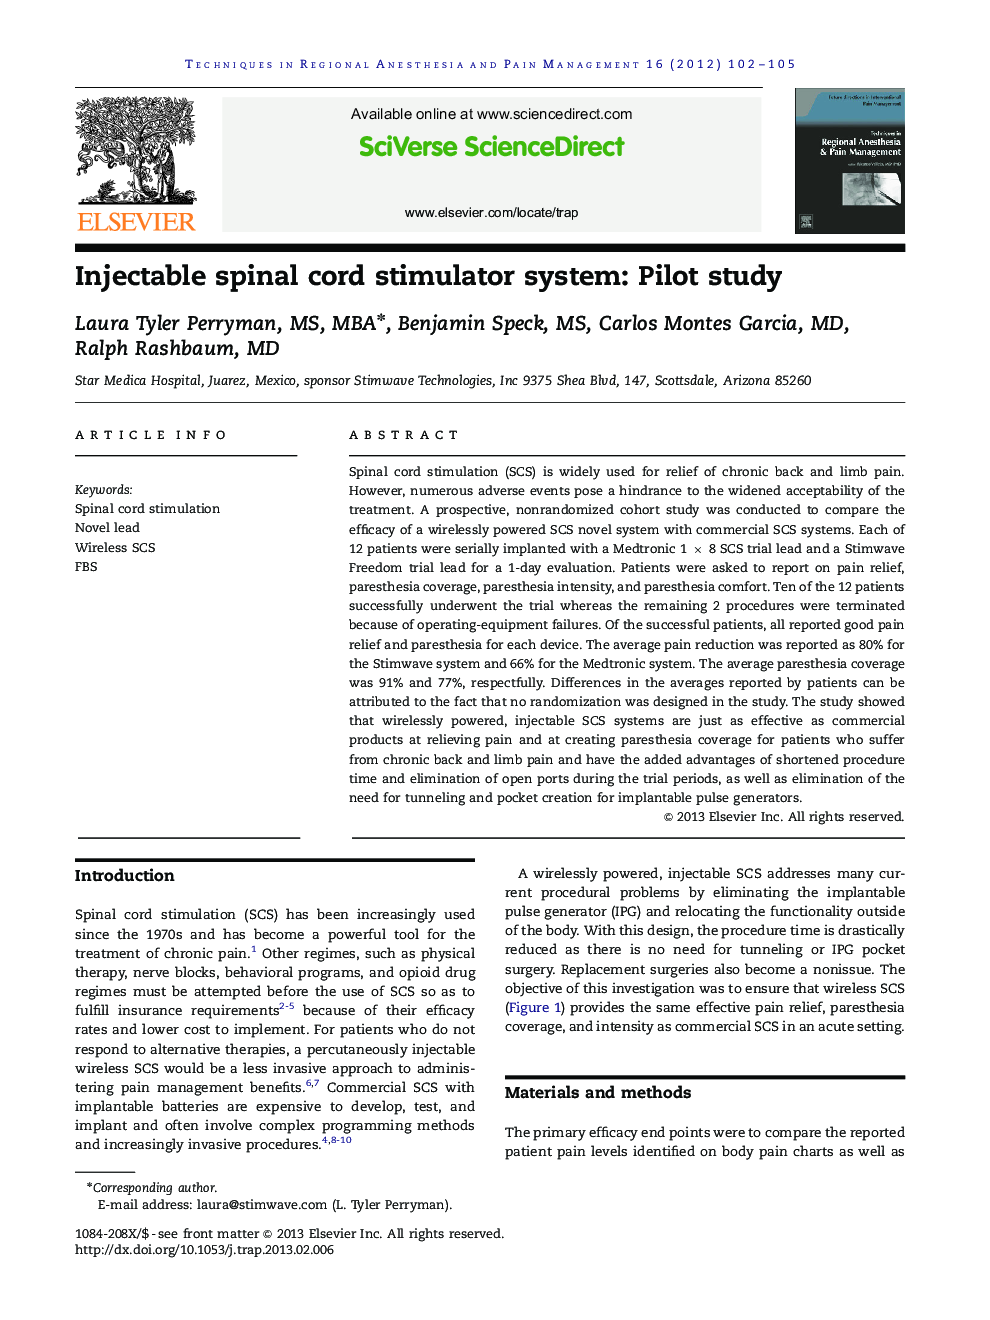 Injectable spinal cord stimulator system: Pilot study